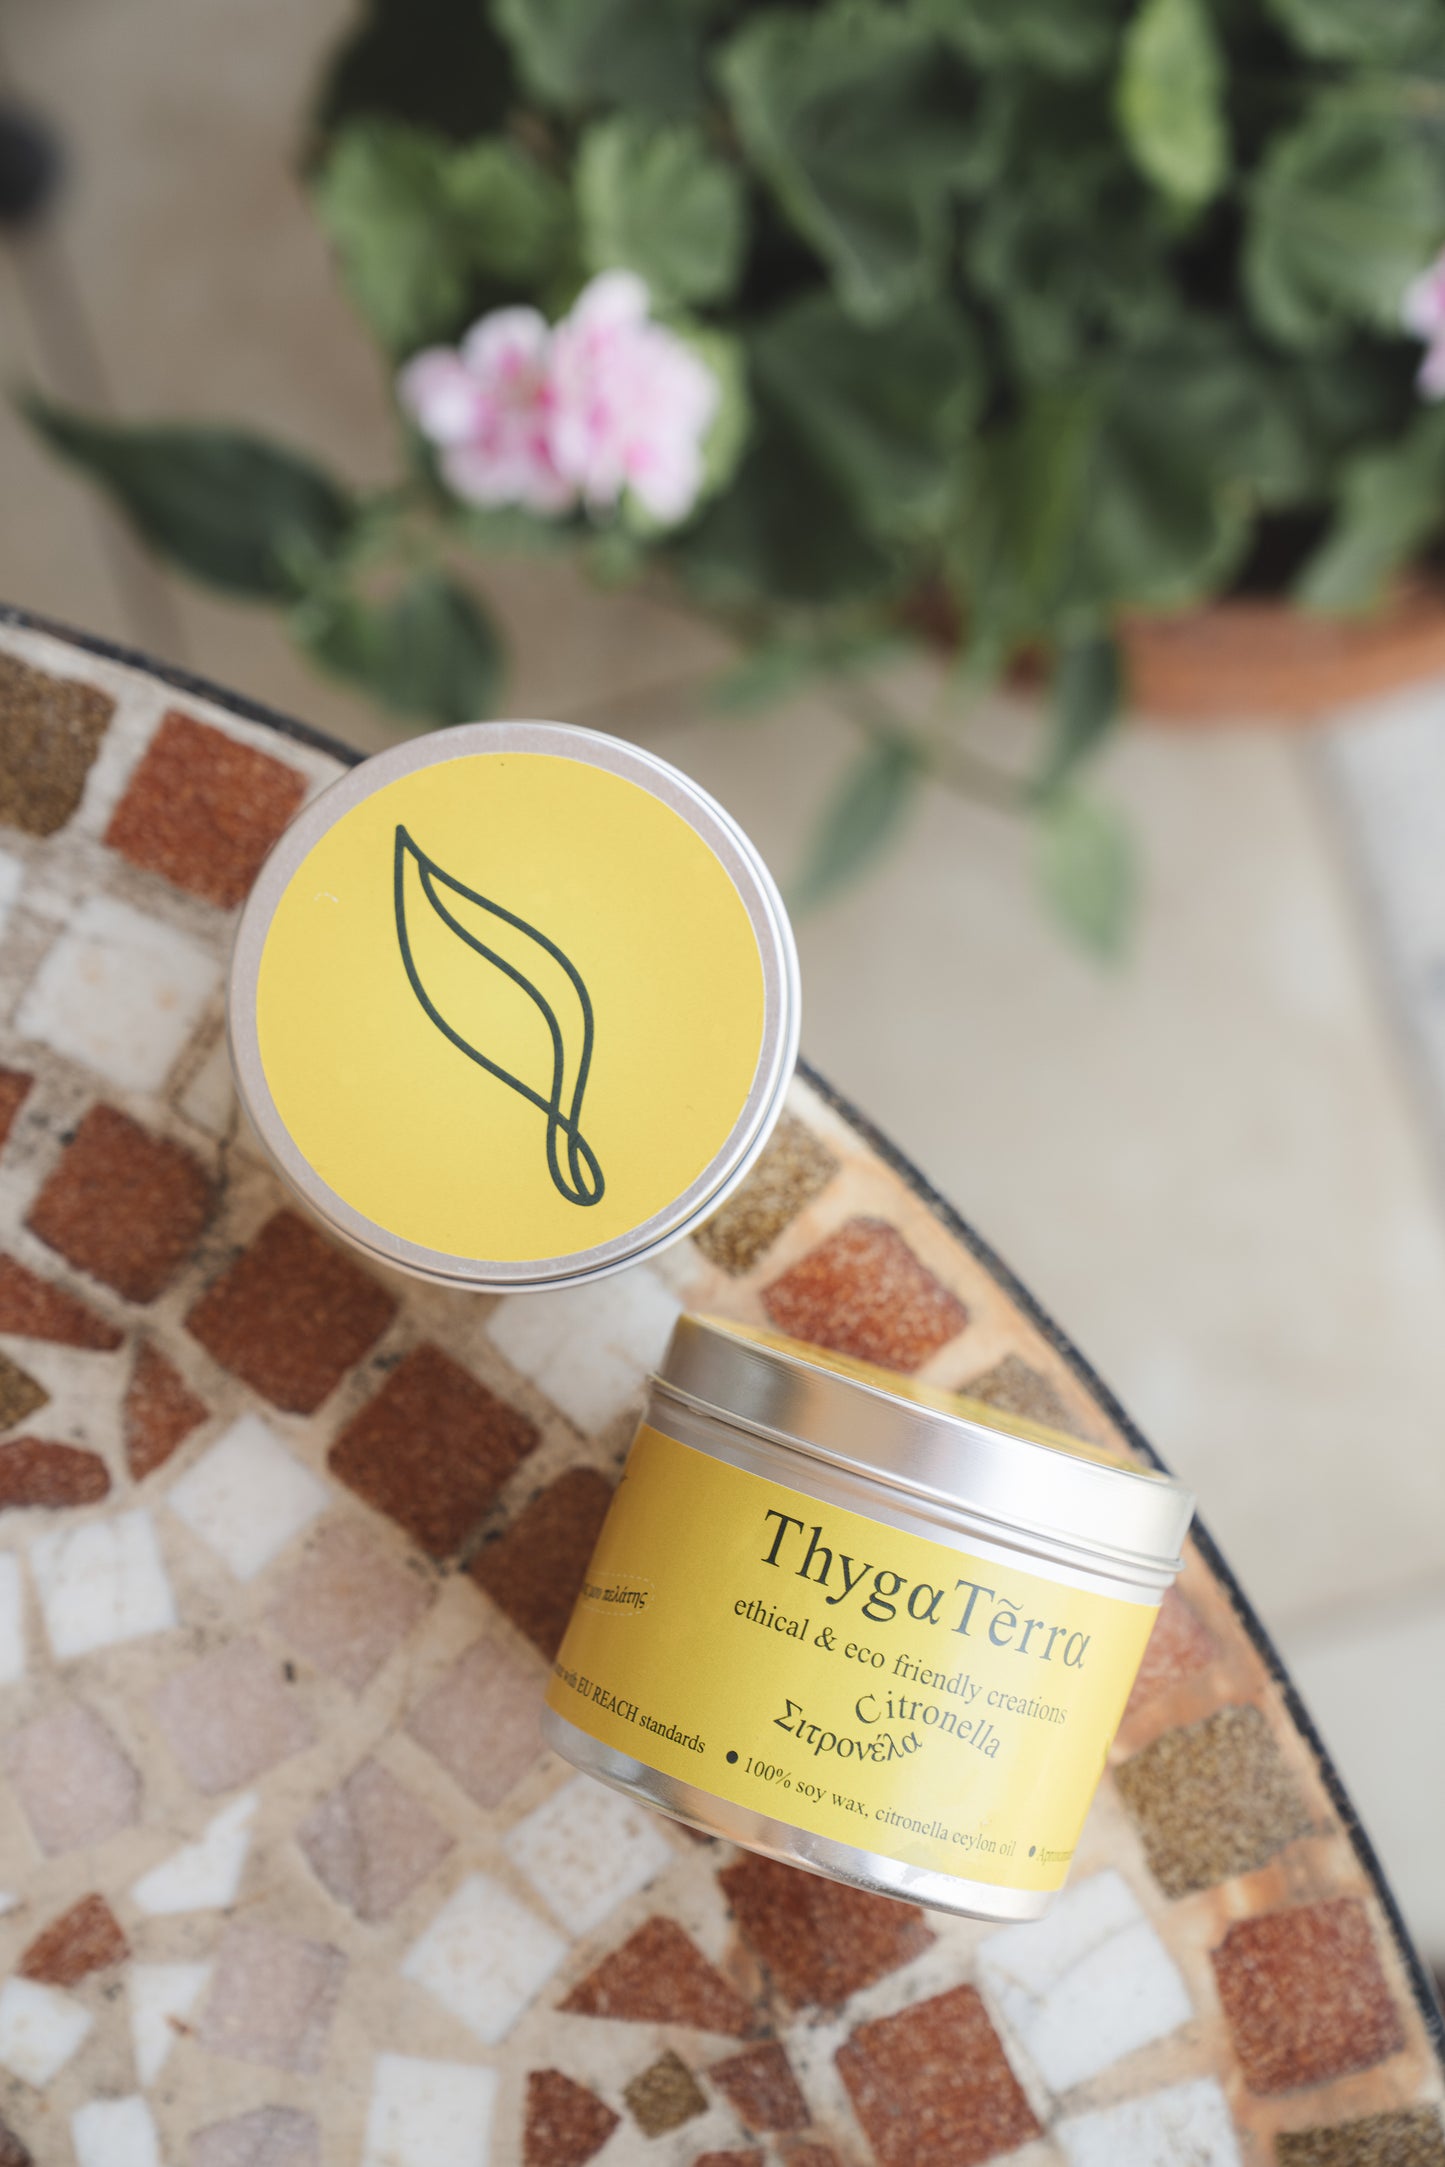 Citronella soy candle